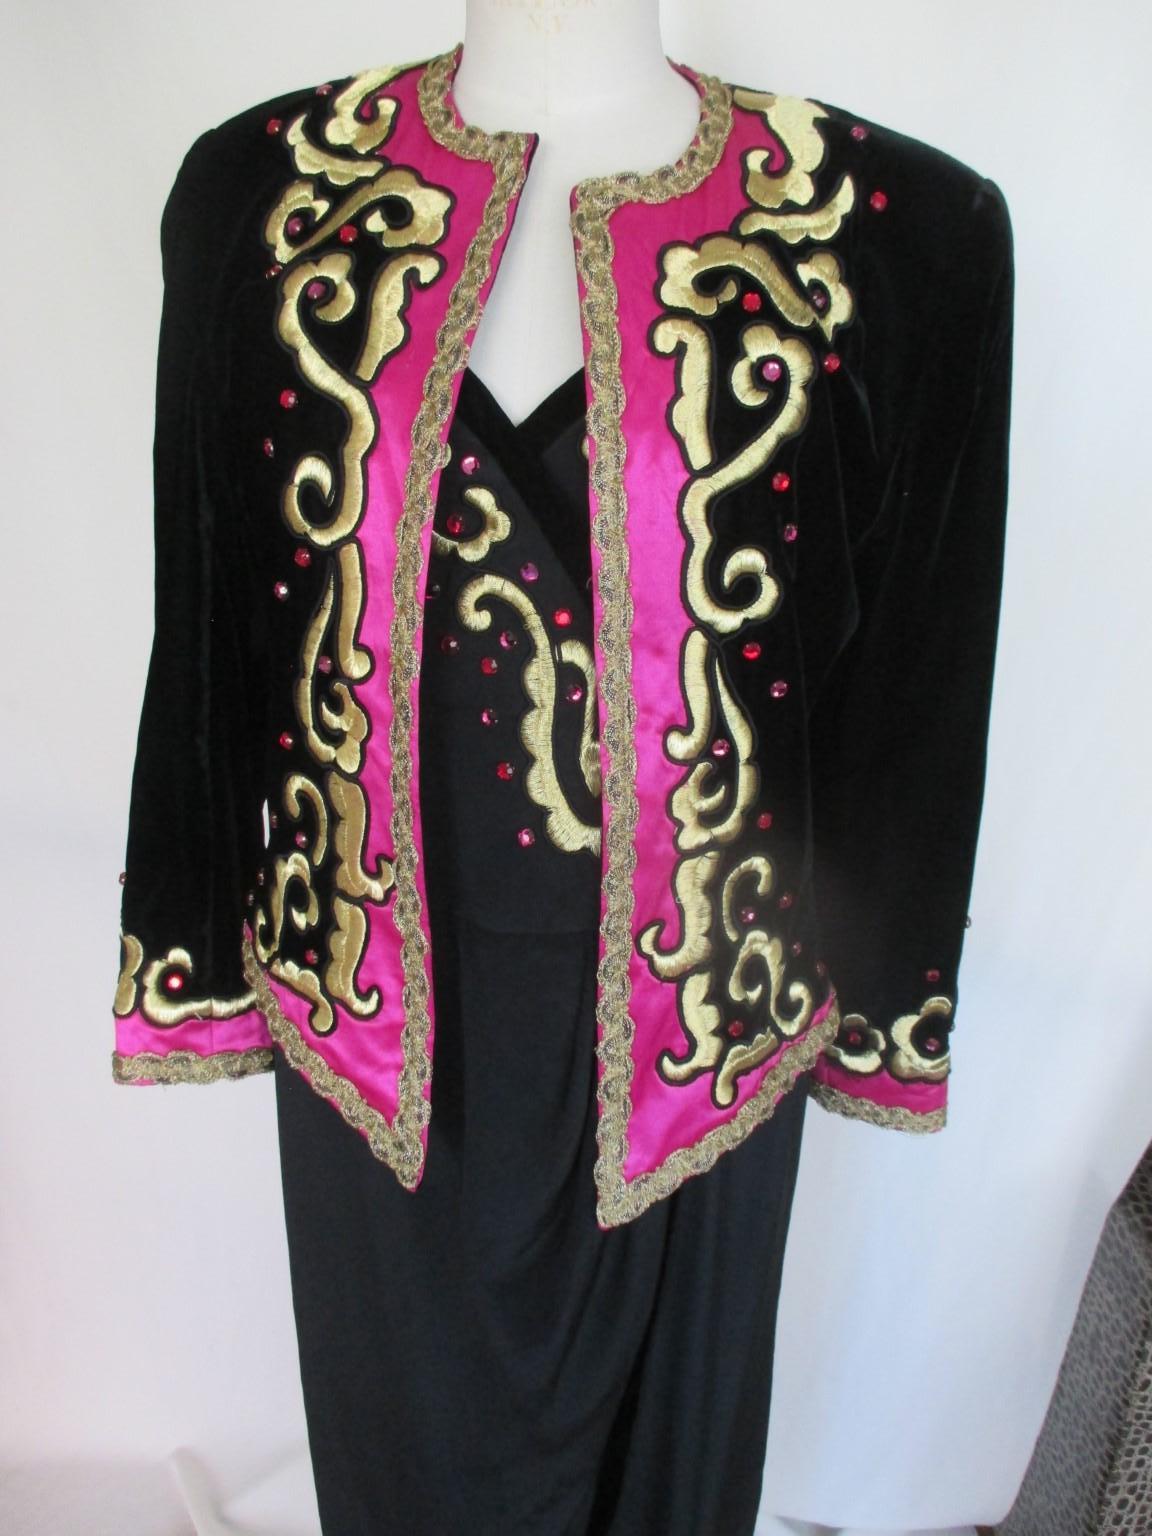 Rare Escada by Margaretha Ley gold/velvet/black/pink/rhinestones ladies evening/party jacket and dress.

We offer more exclusive items, view our front store.

Details:
Vintage 1980's
Can be worn on jeans or at events
Pre loved condition
Size is